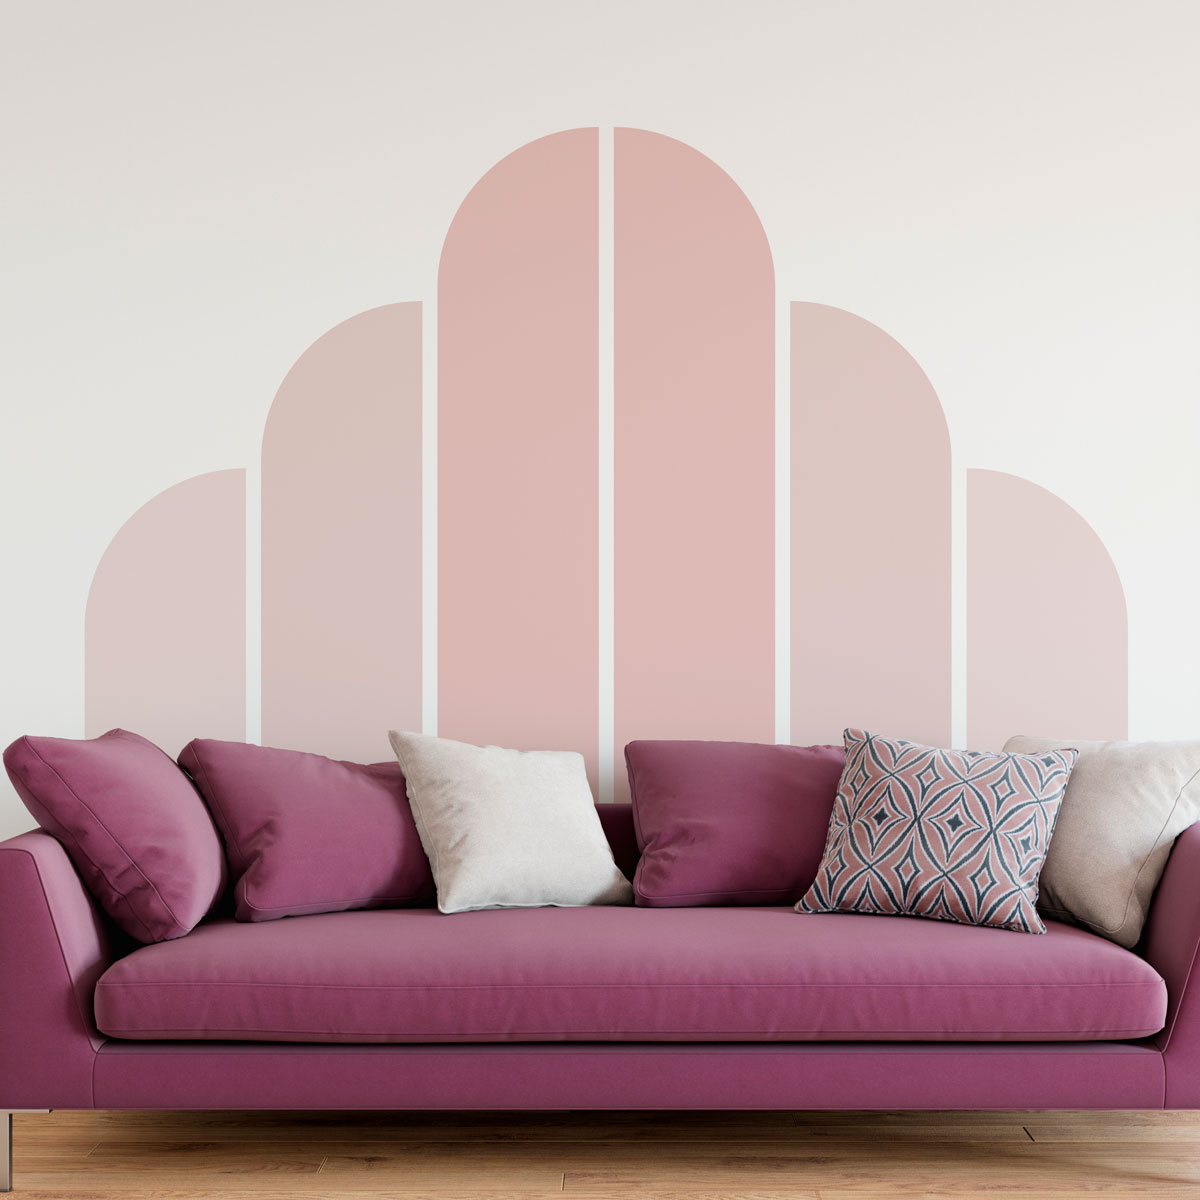 Prepasted wallpaper - Powder pink arches - giant